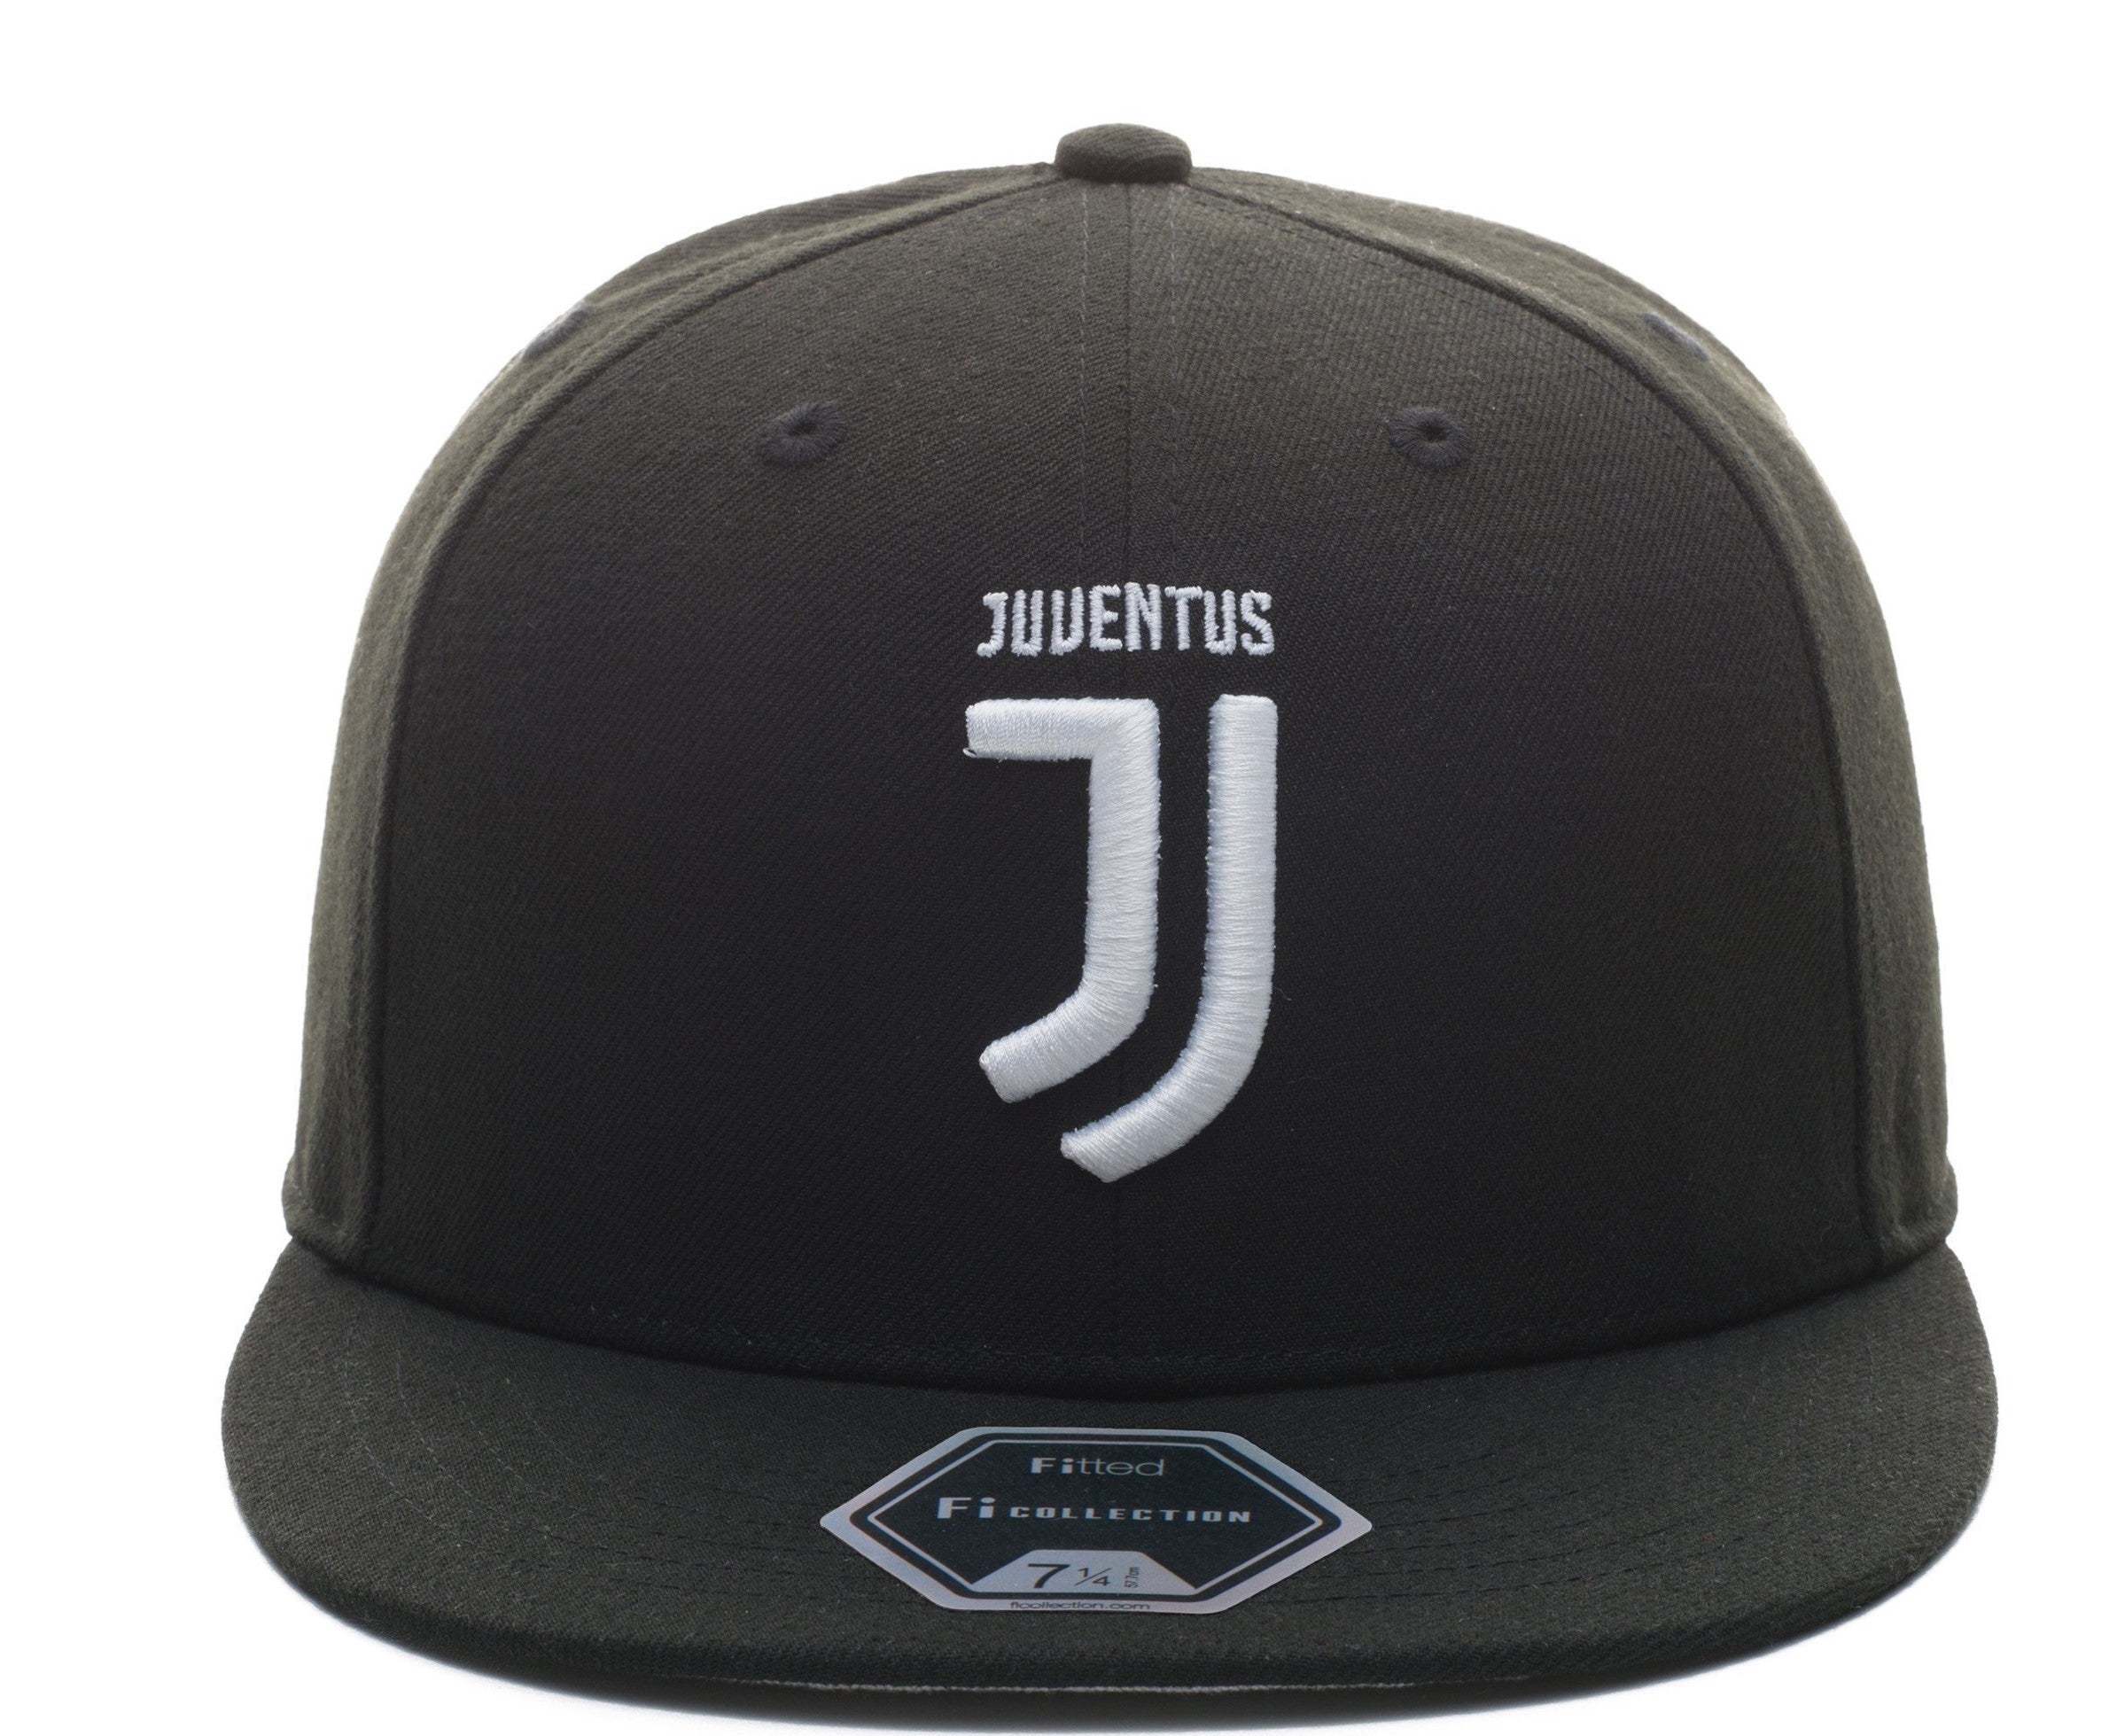 Fi Collections Juventus F.C. Dawn Fitted Hat-Black/White